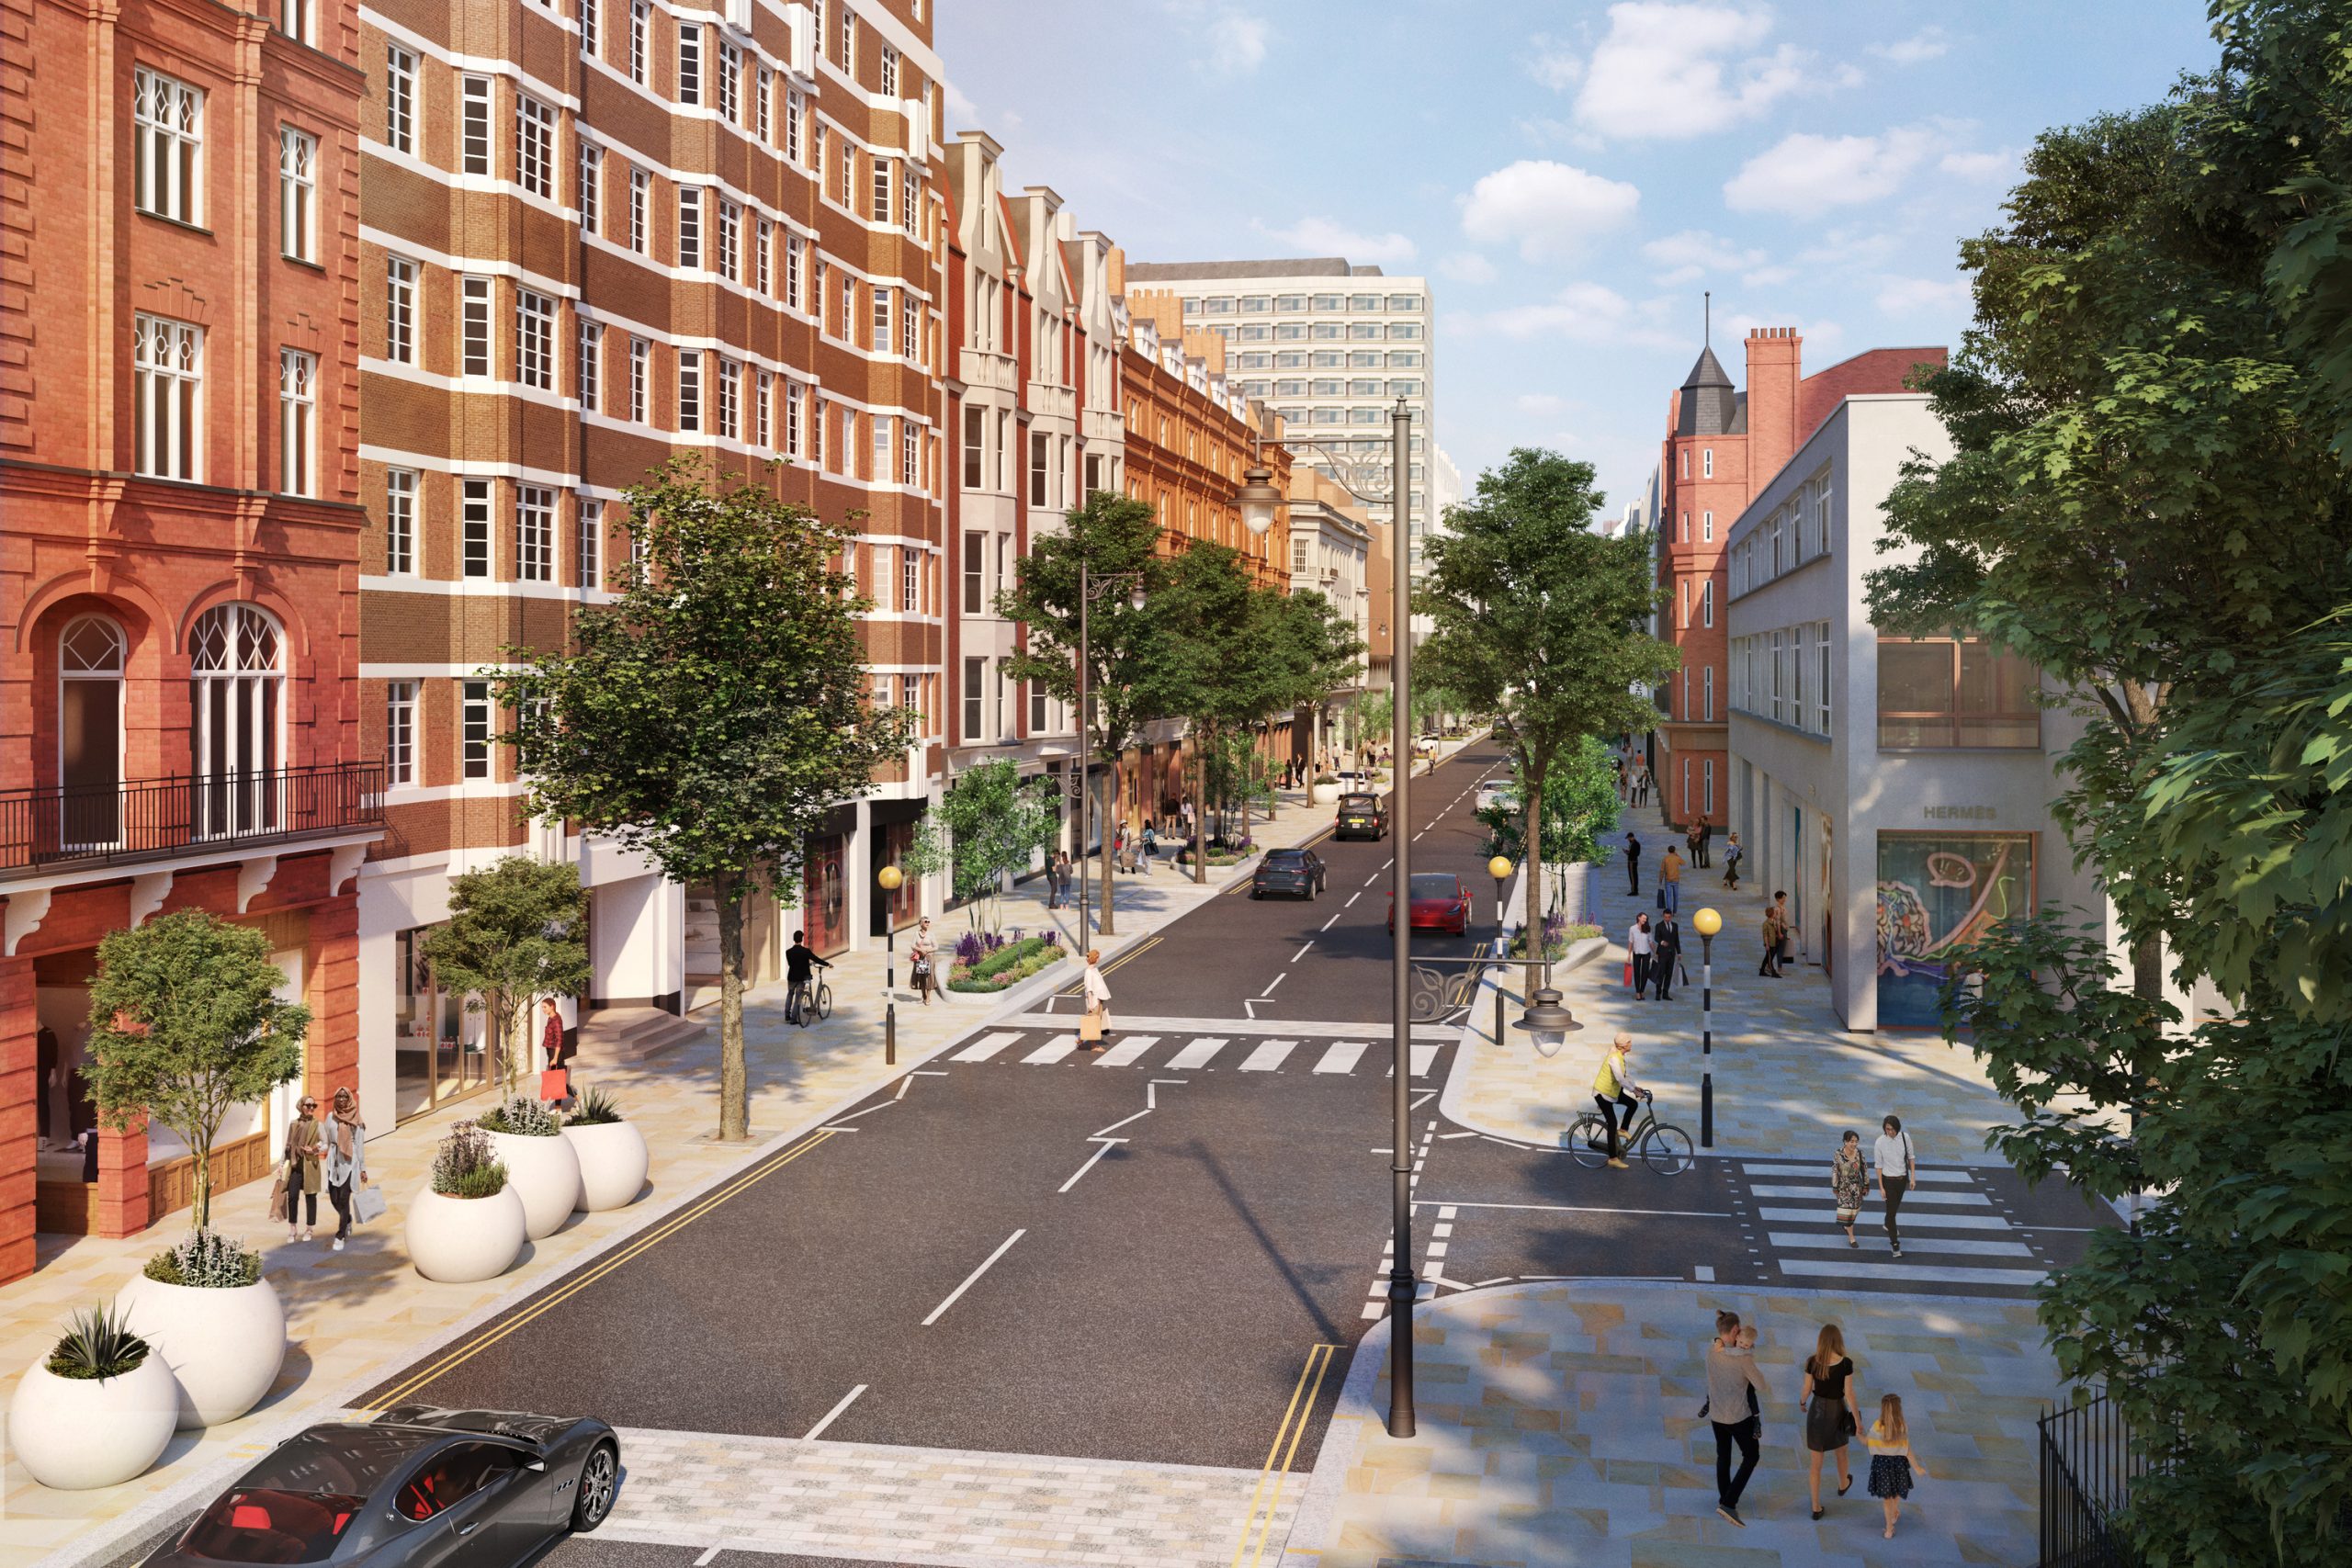 sloane-street-is-getting-a-frankly-unnecessary-46m-makeover